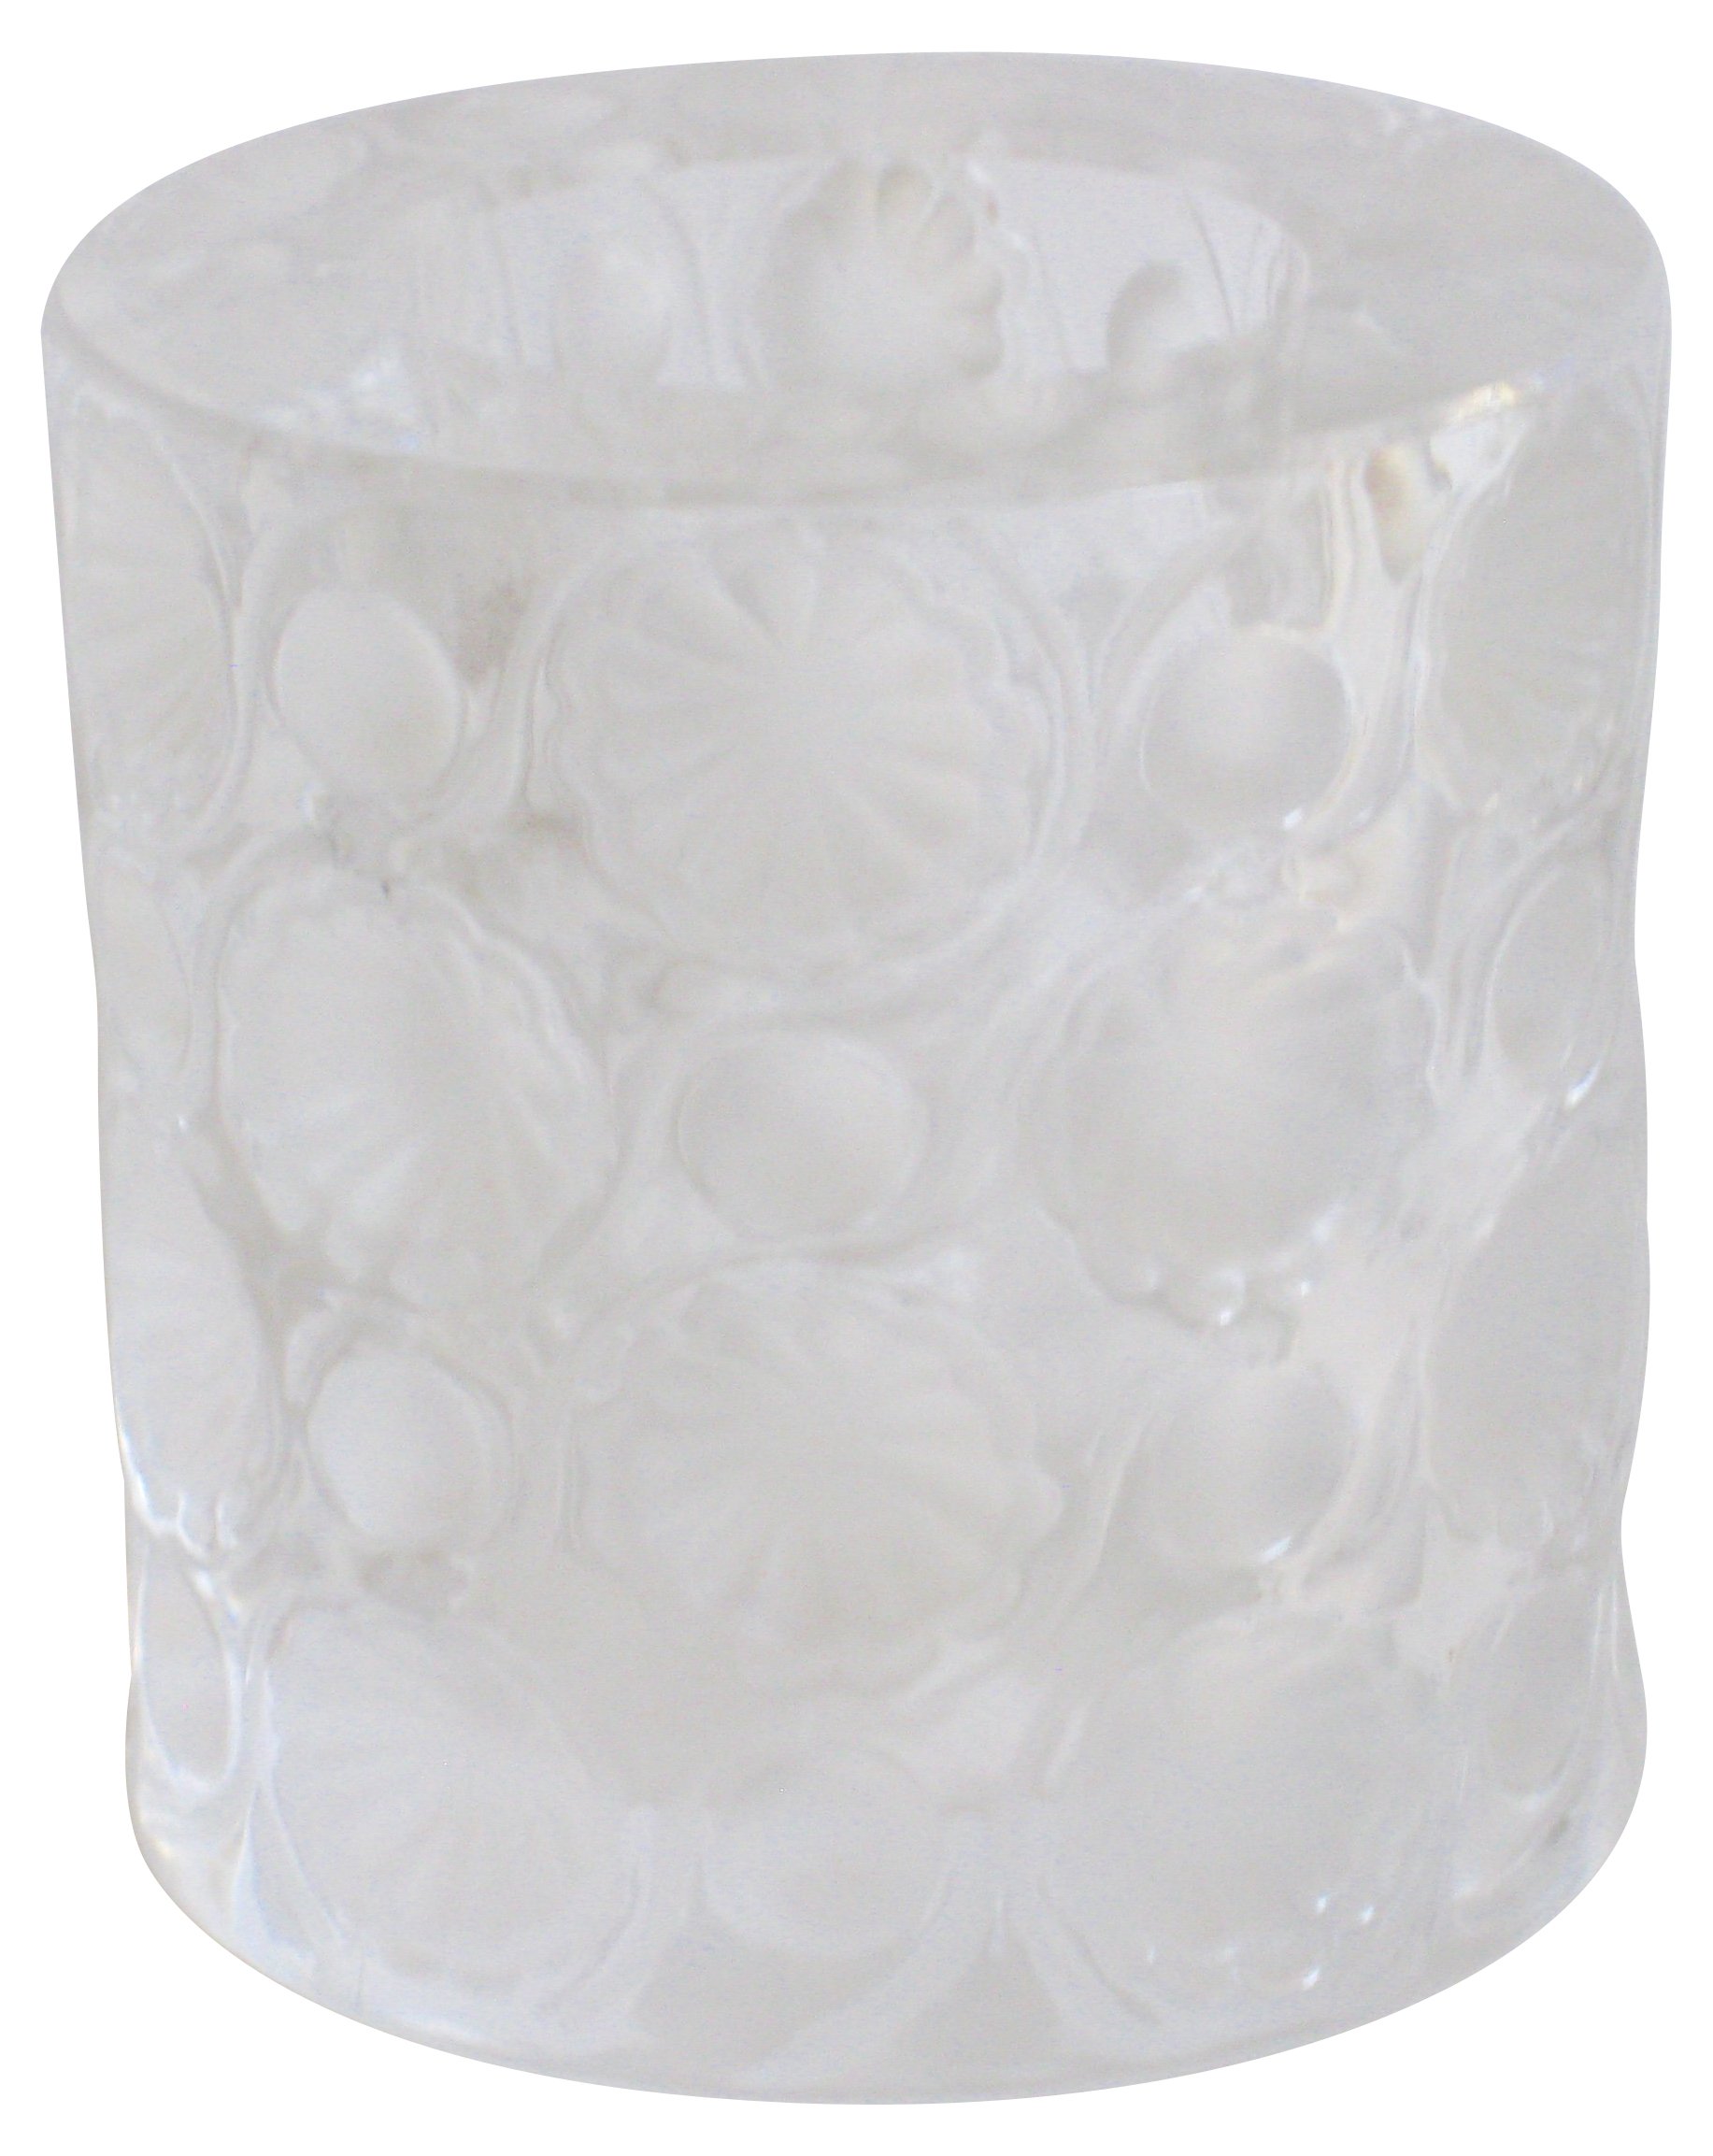 Lalique French Art Deco Crystal Catchall | One Kings Lane